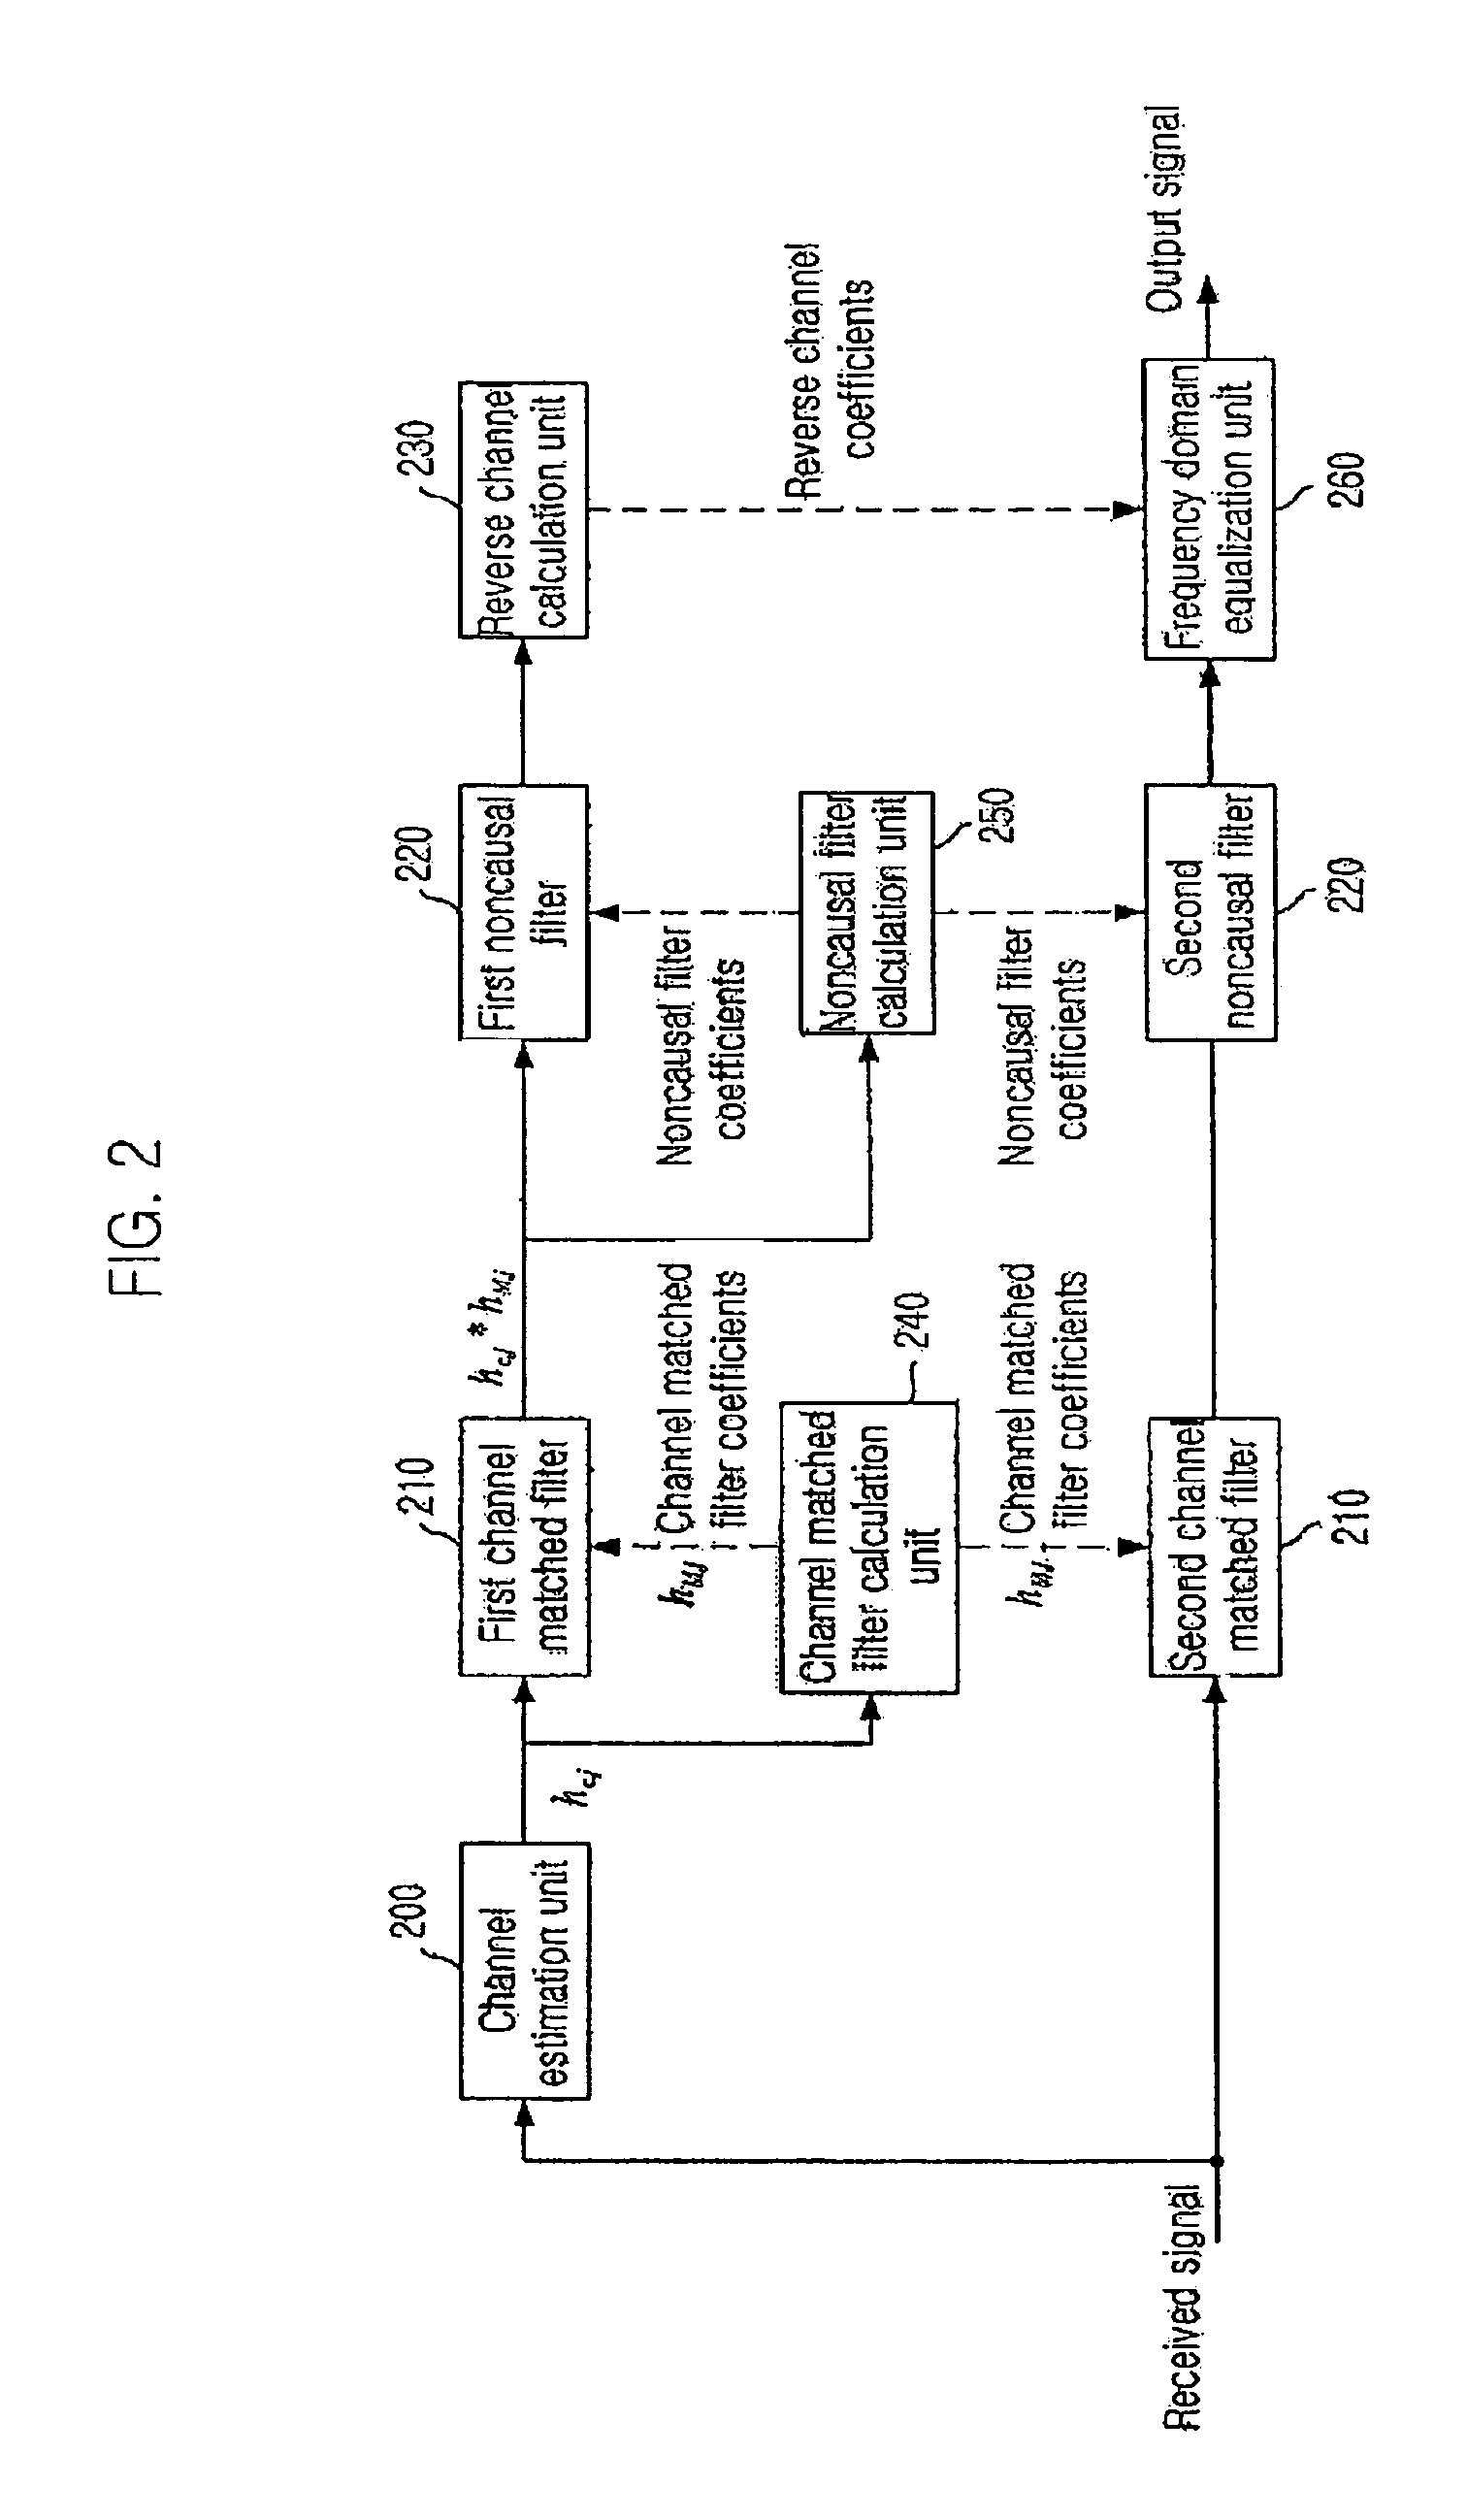 Apparatus for equalizing channel in frequency domain and method therefor